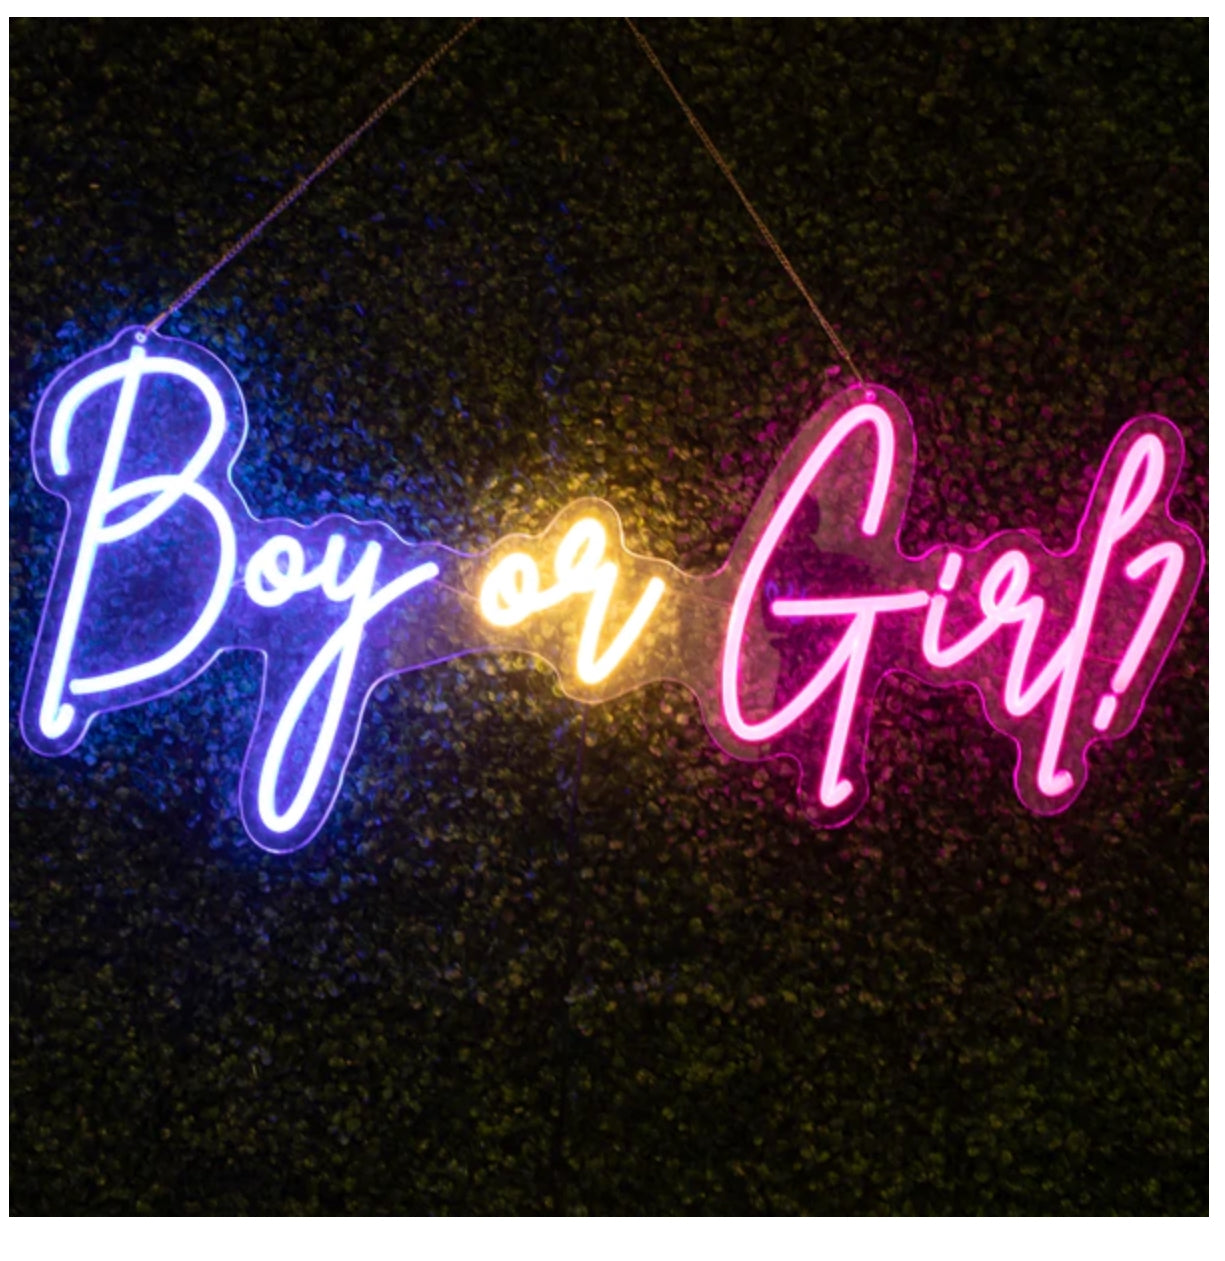 NEON SIGNS (oh baby, better together, quinceanera and more